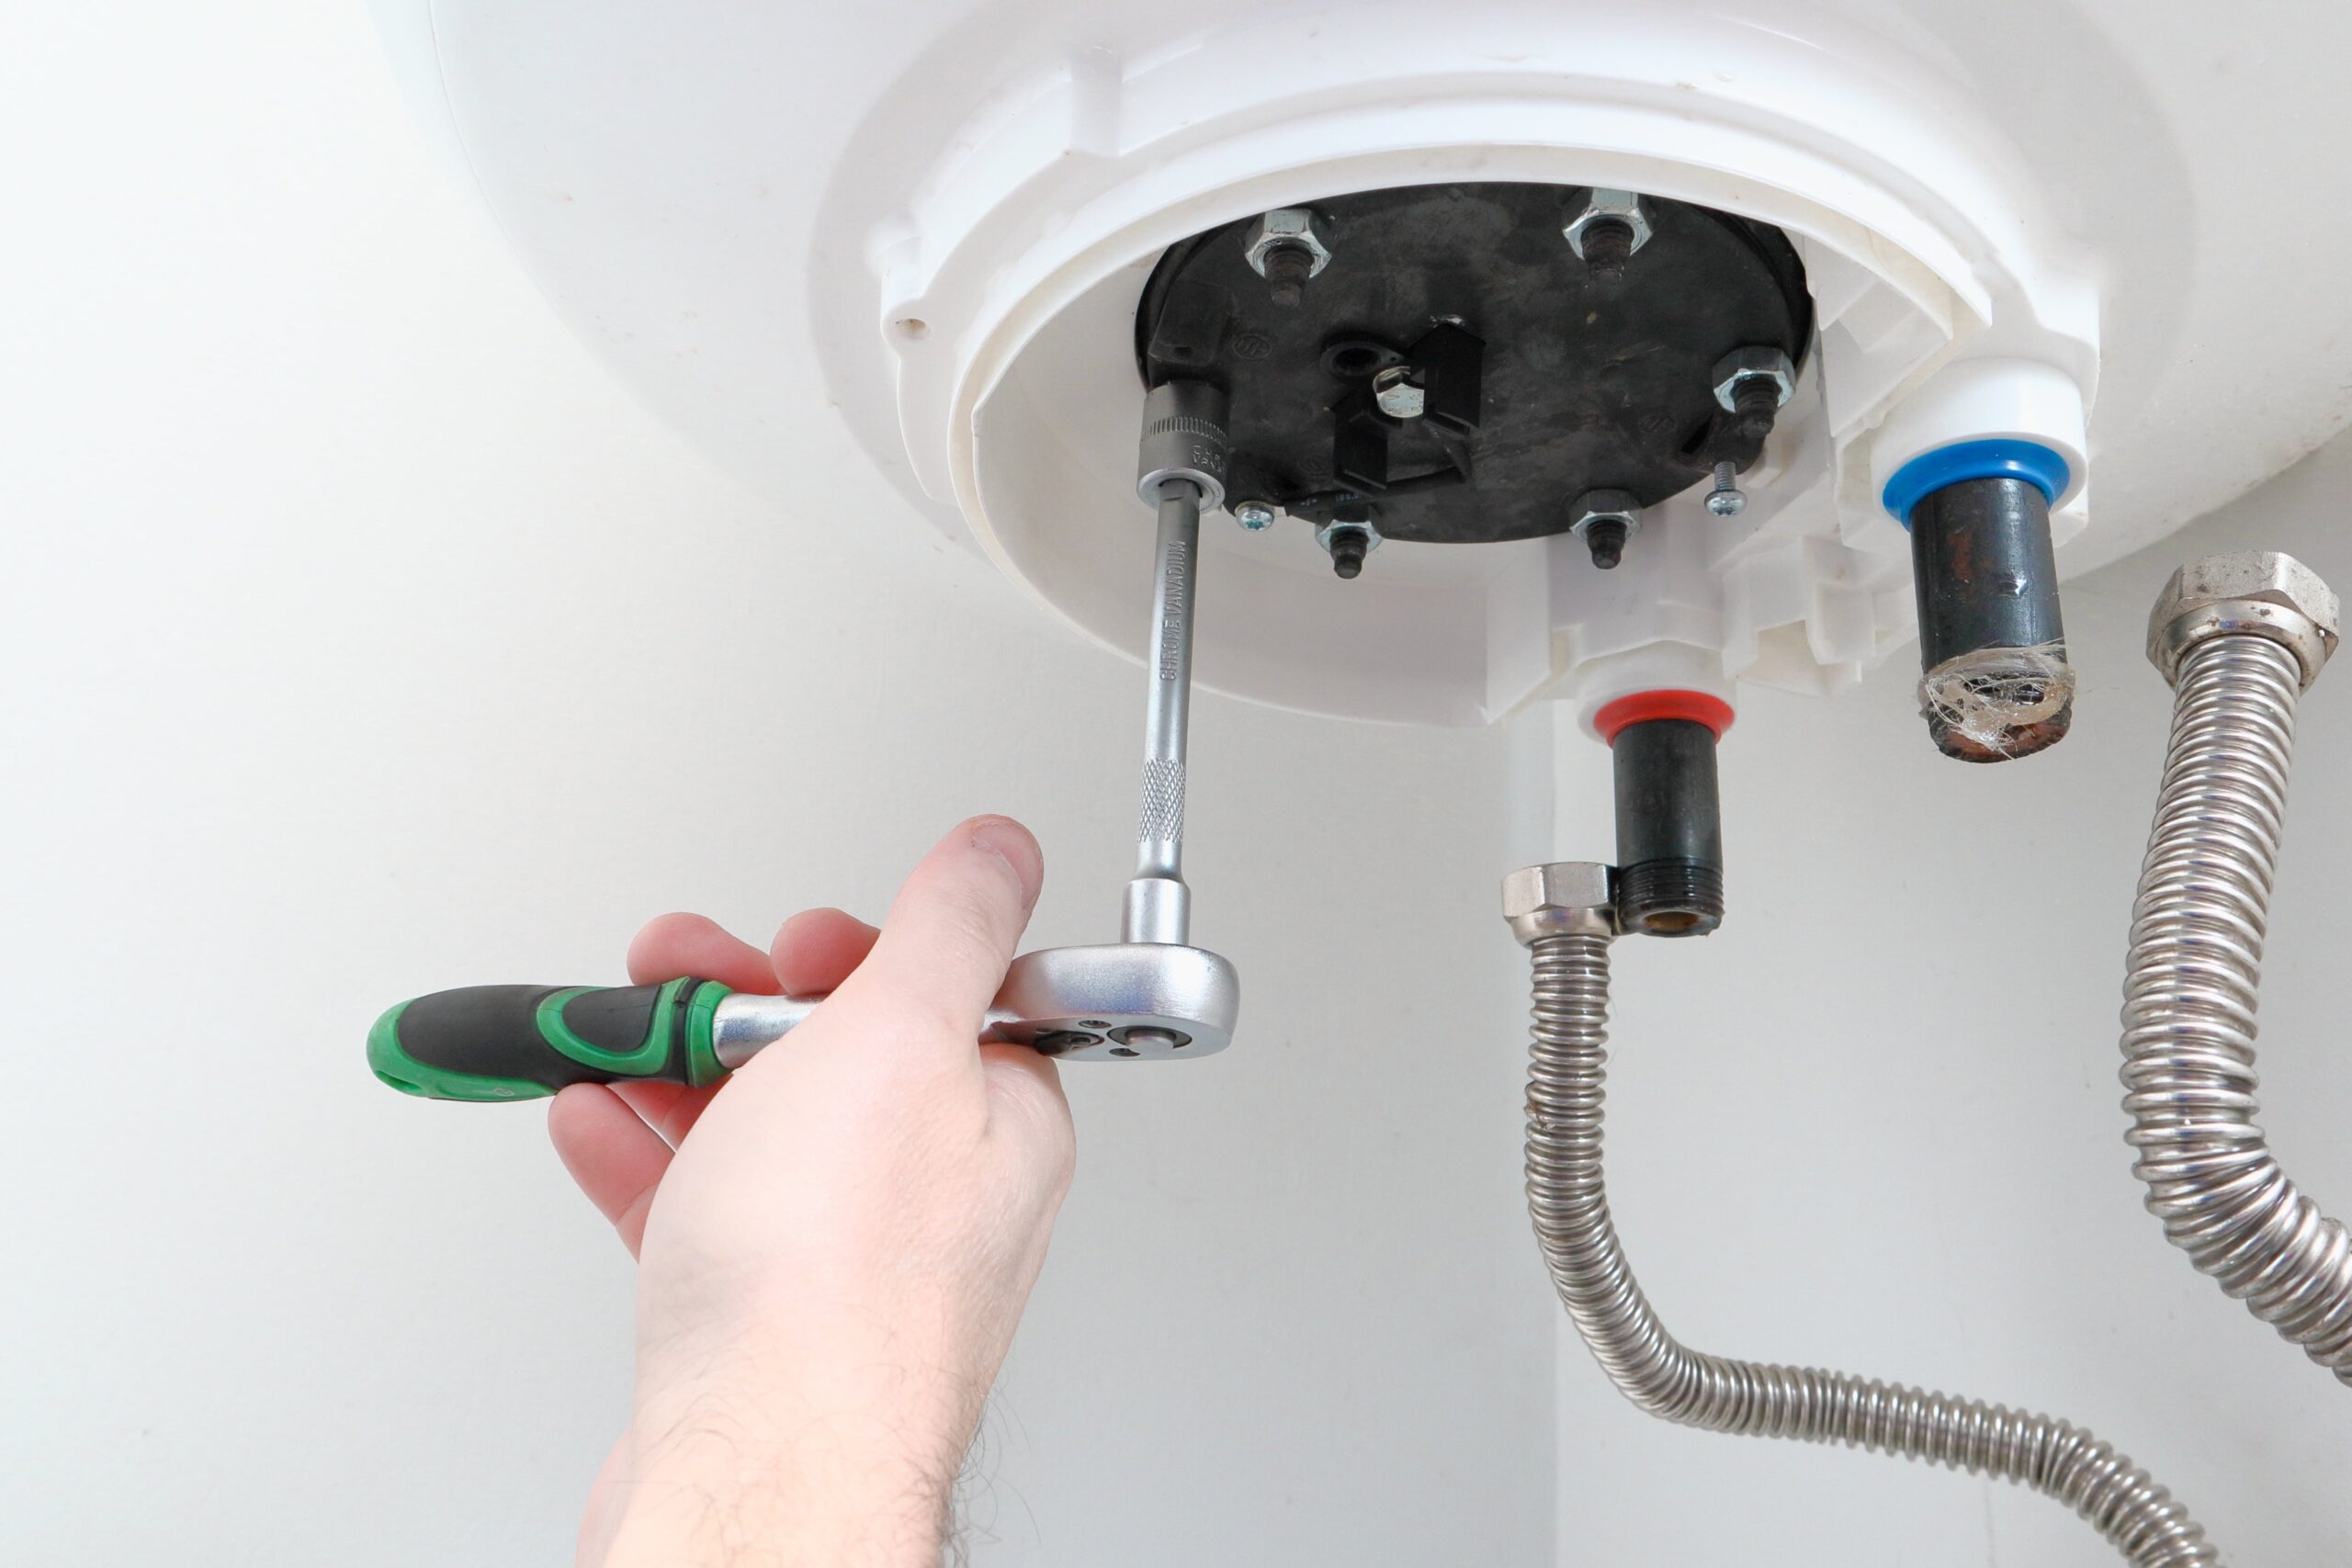 Expert Hot Water Installers in San Antonio: Choose o5 Plumbing for Your Next Installation